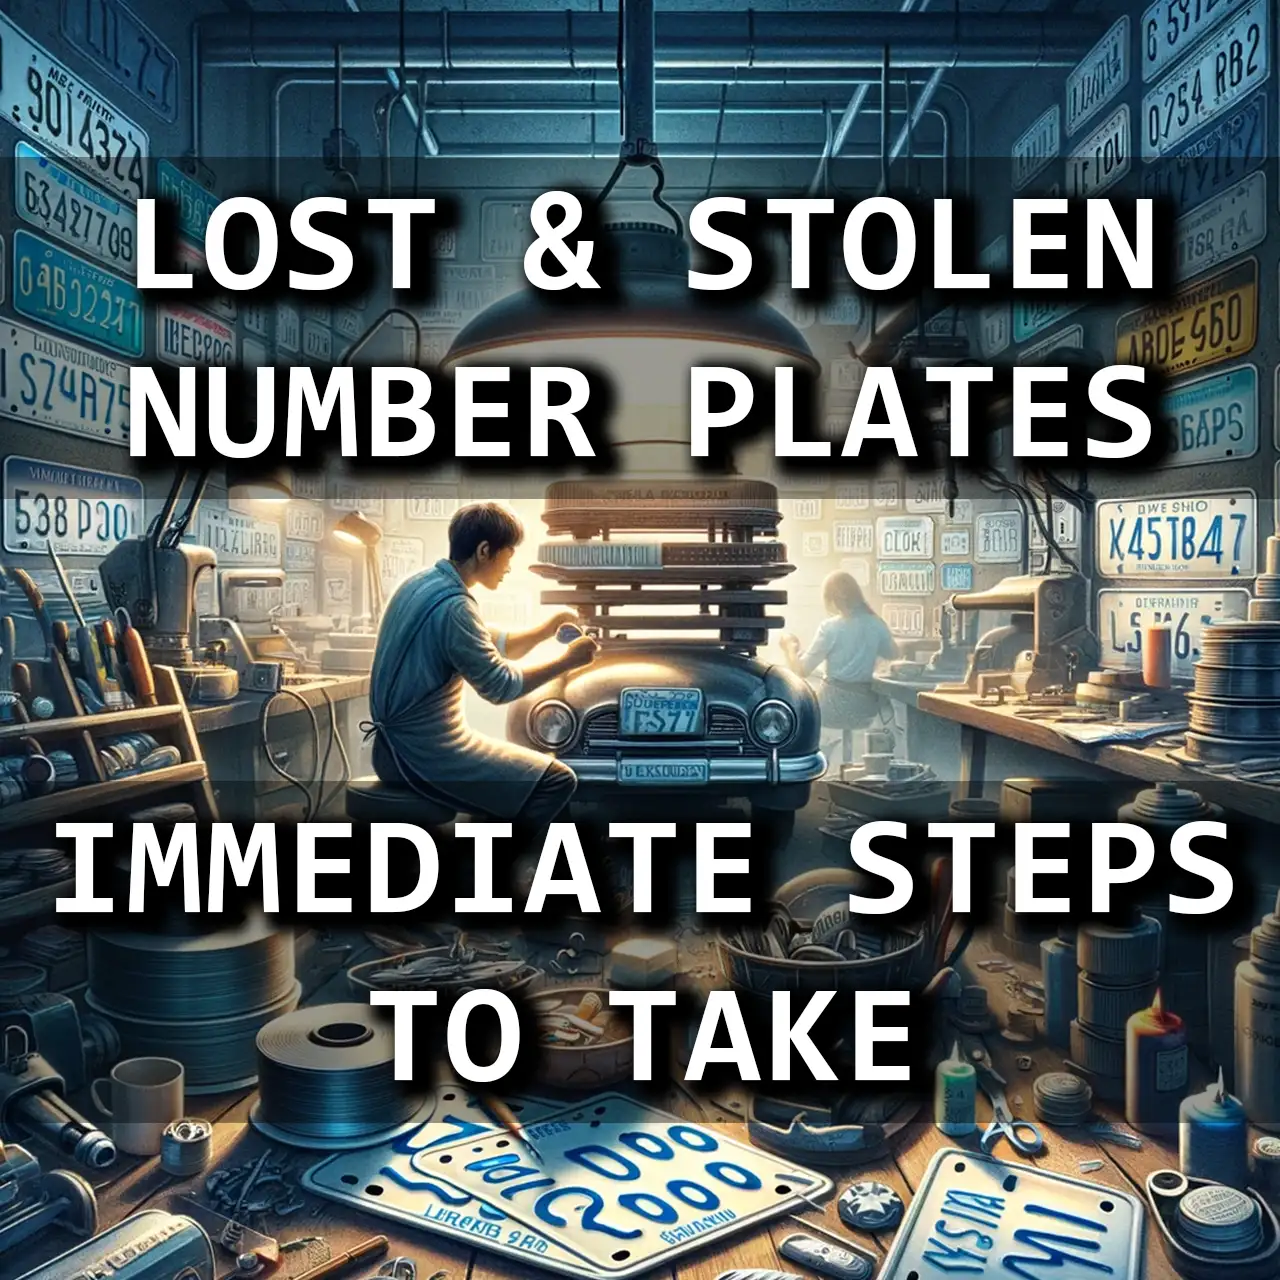 SurePlates Lost or Stolen Number Plates Immediate Steps to Take for Recovery copy